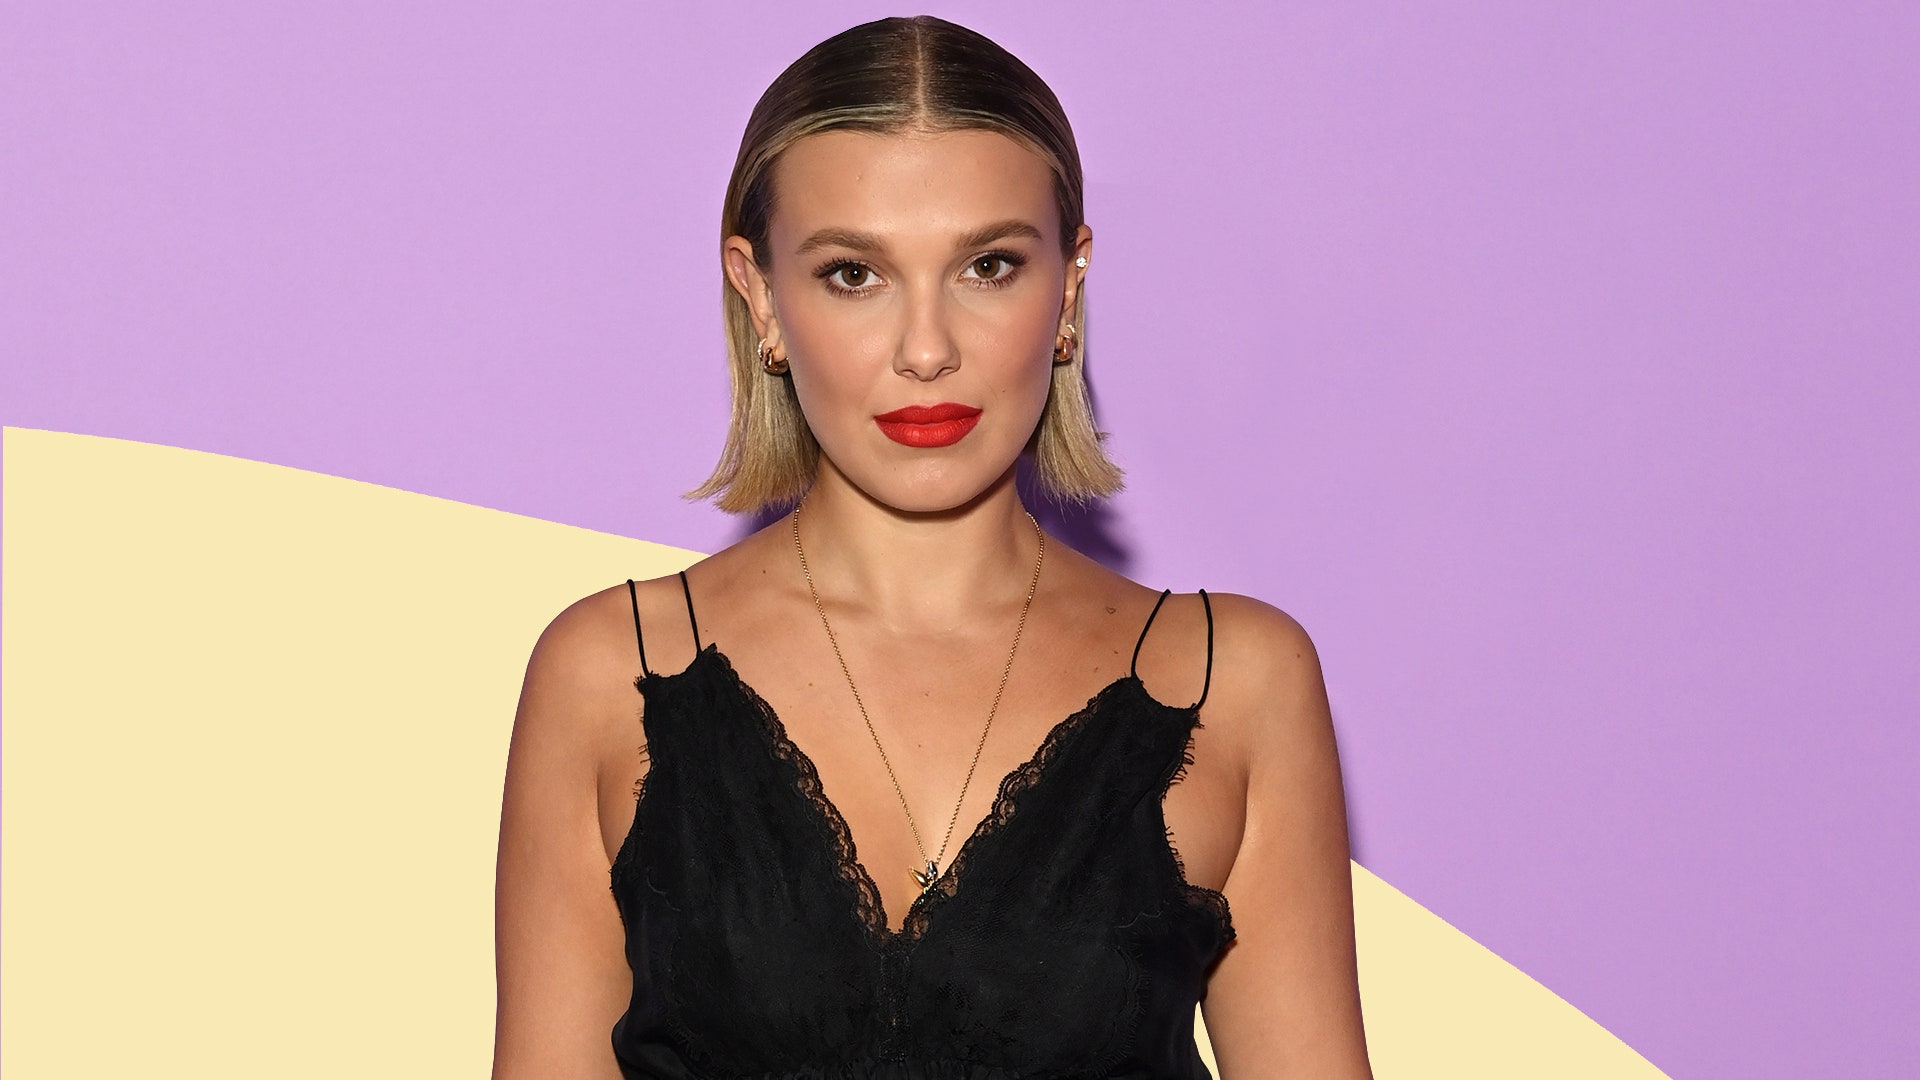 Millie Bobby Brown says She's 'Ready' to Leave Stranger Things's Why